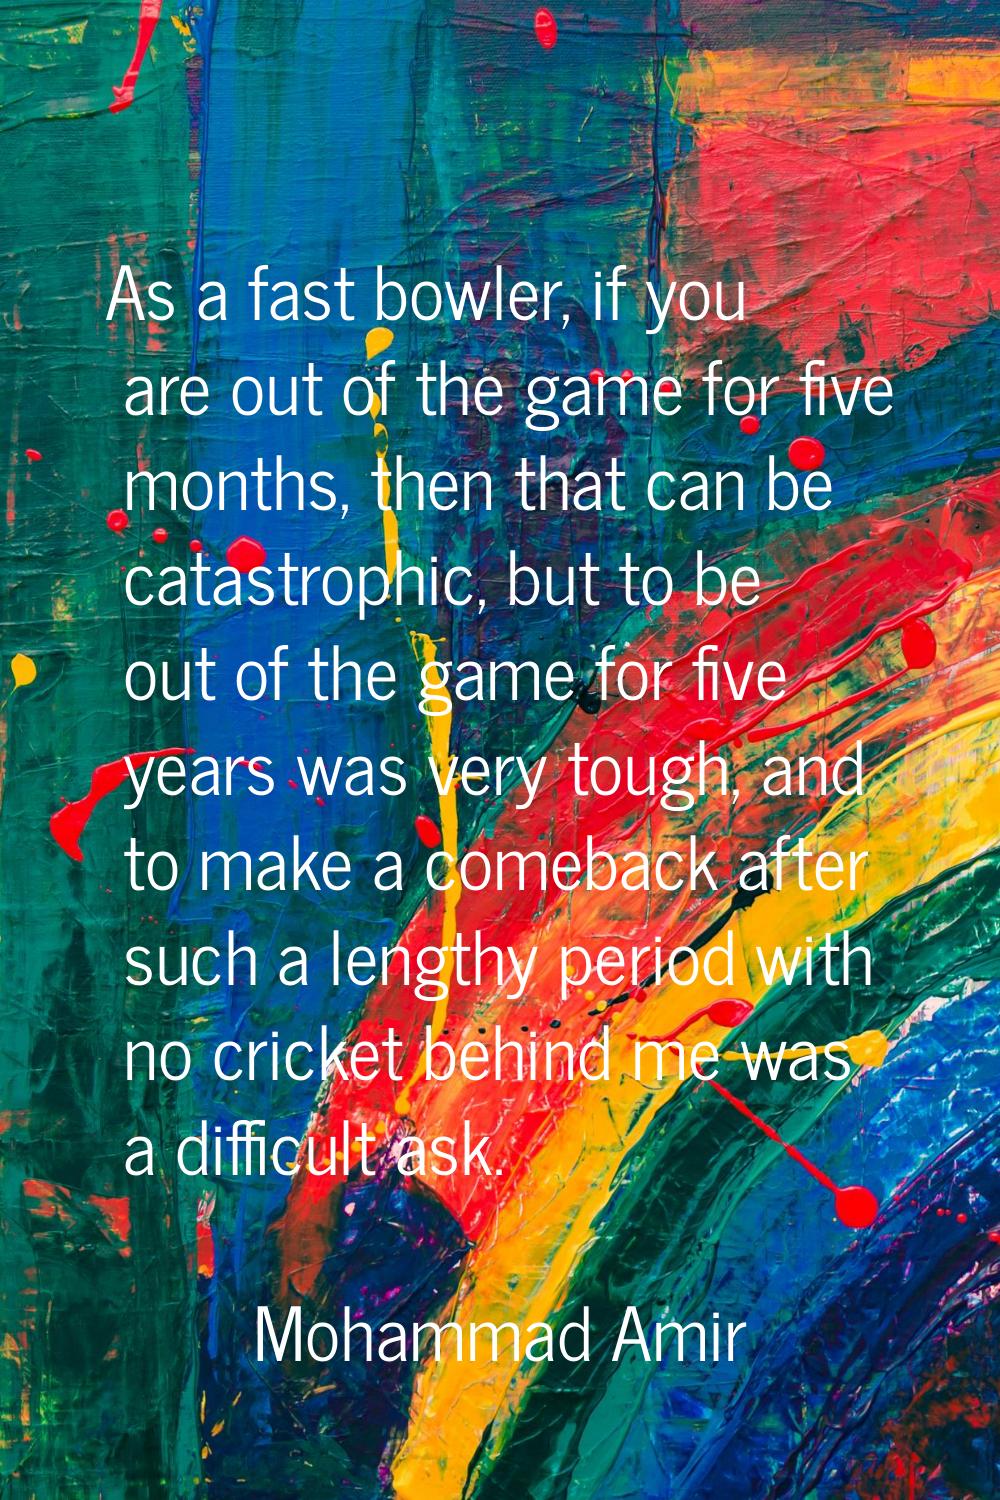 As a fast bowler, if you are out of the game for five months, then that can be catastrophic, but to